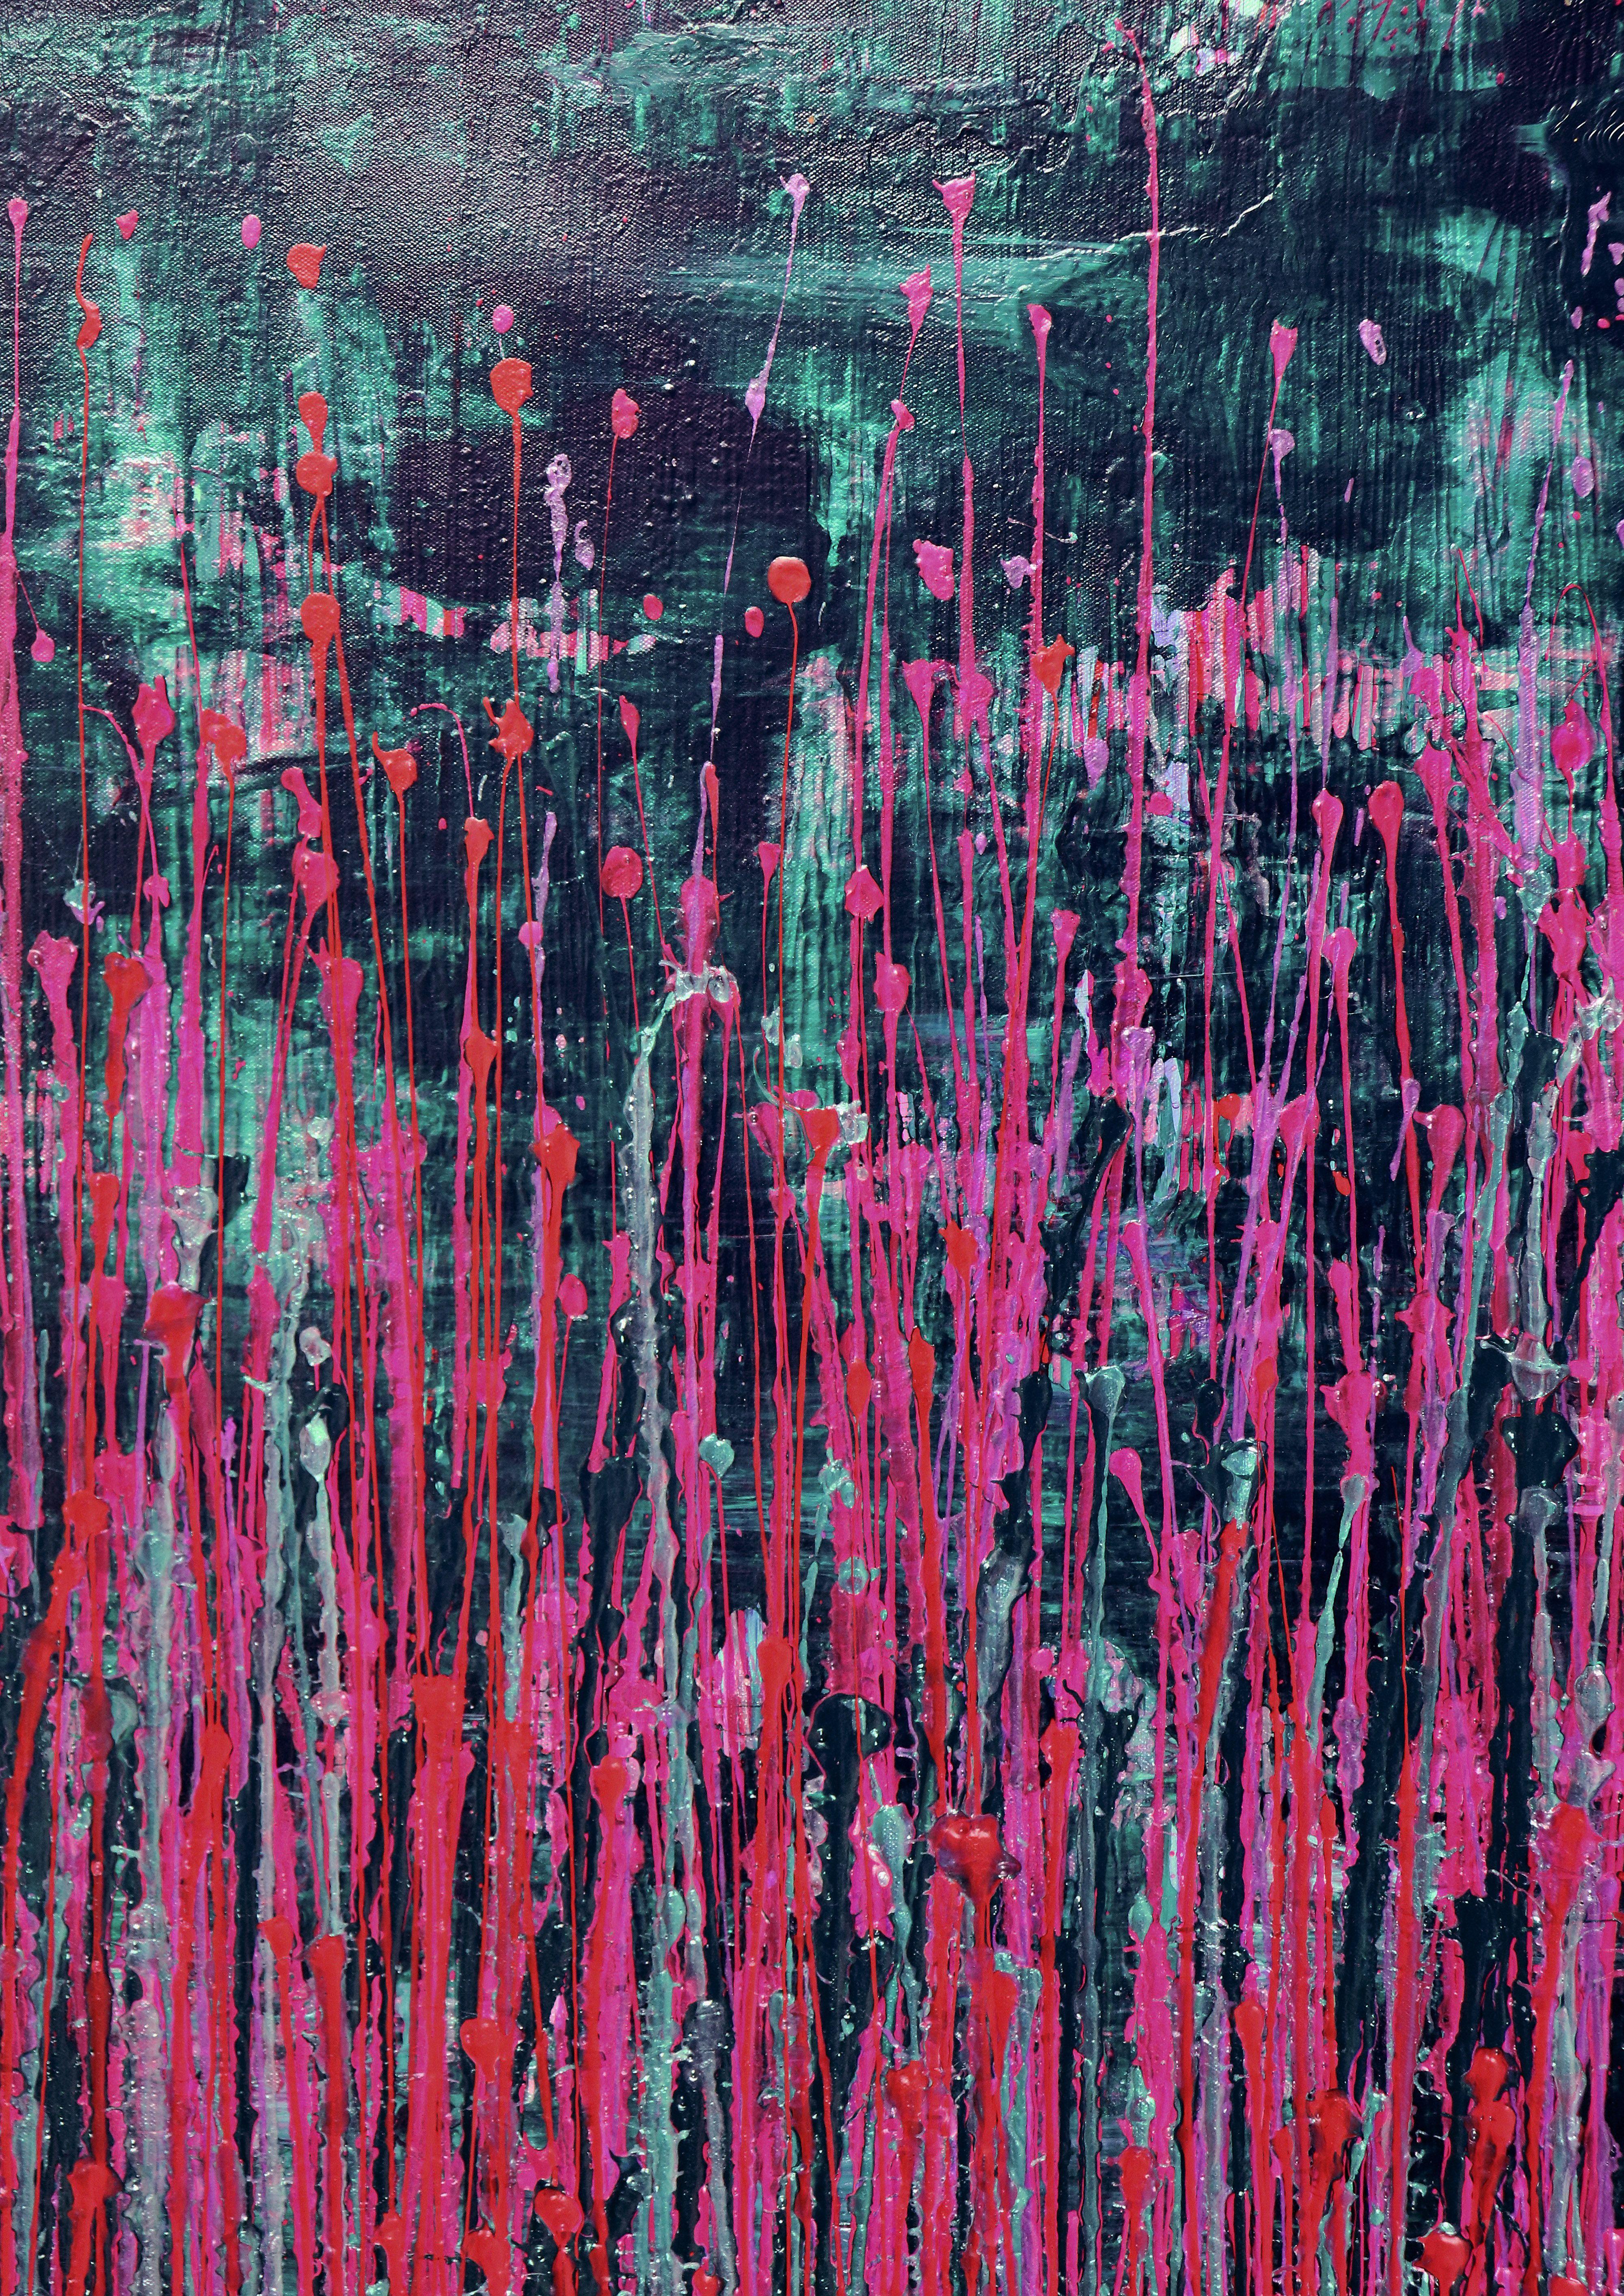 Vibrant abstract painting with many action drizzles in vibrant pink, orange, green and iridescent clear paint, over dark forest metallic green background. Signed in front.    I include a certificate of authenticity that lists the materials as well